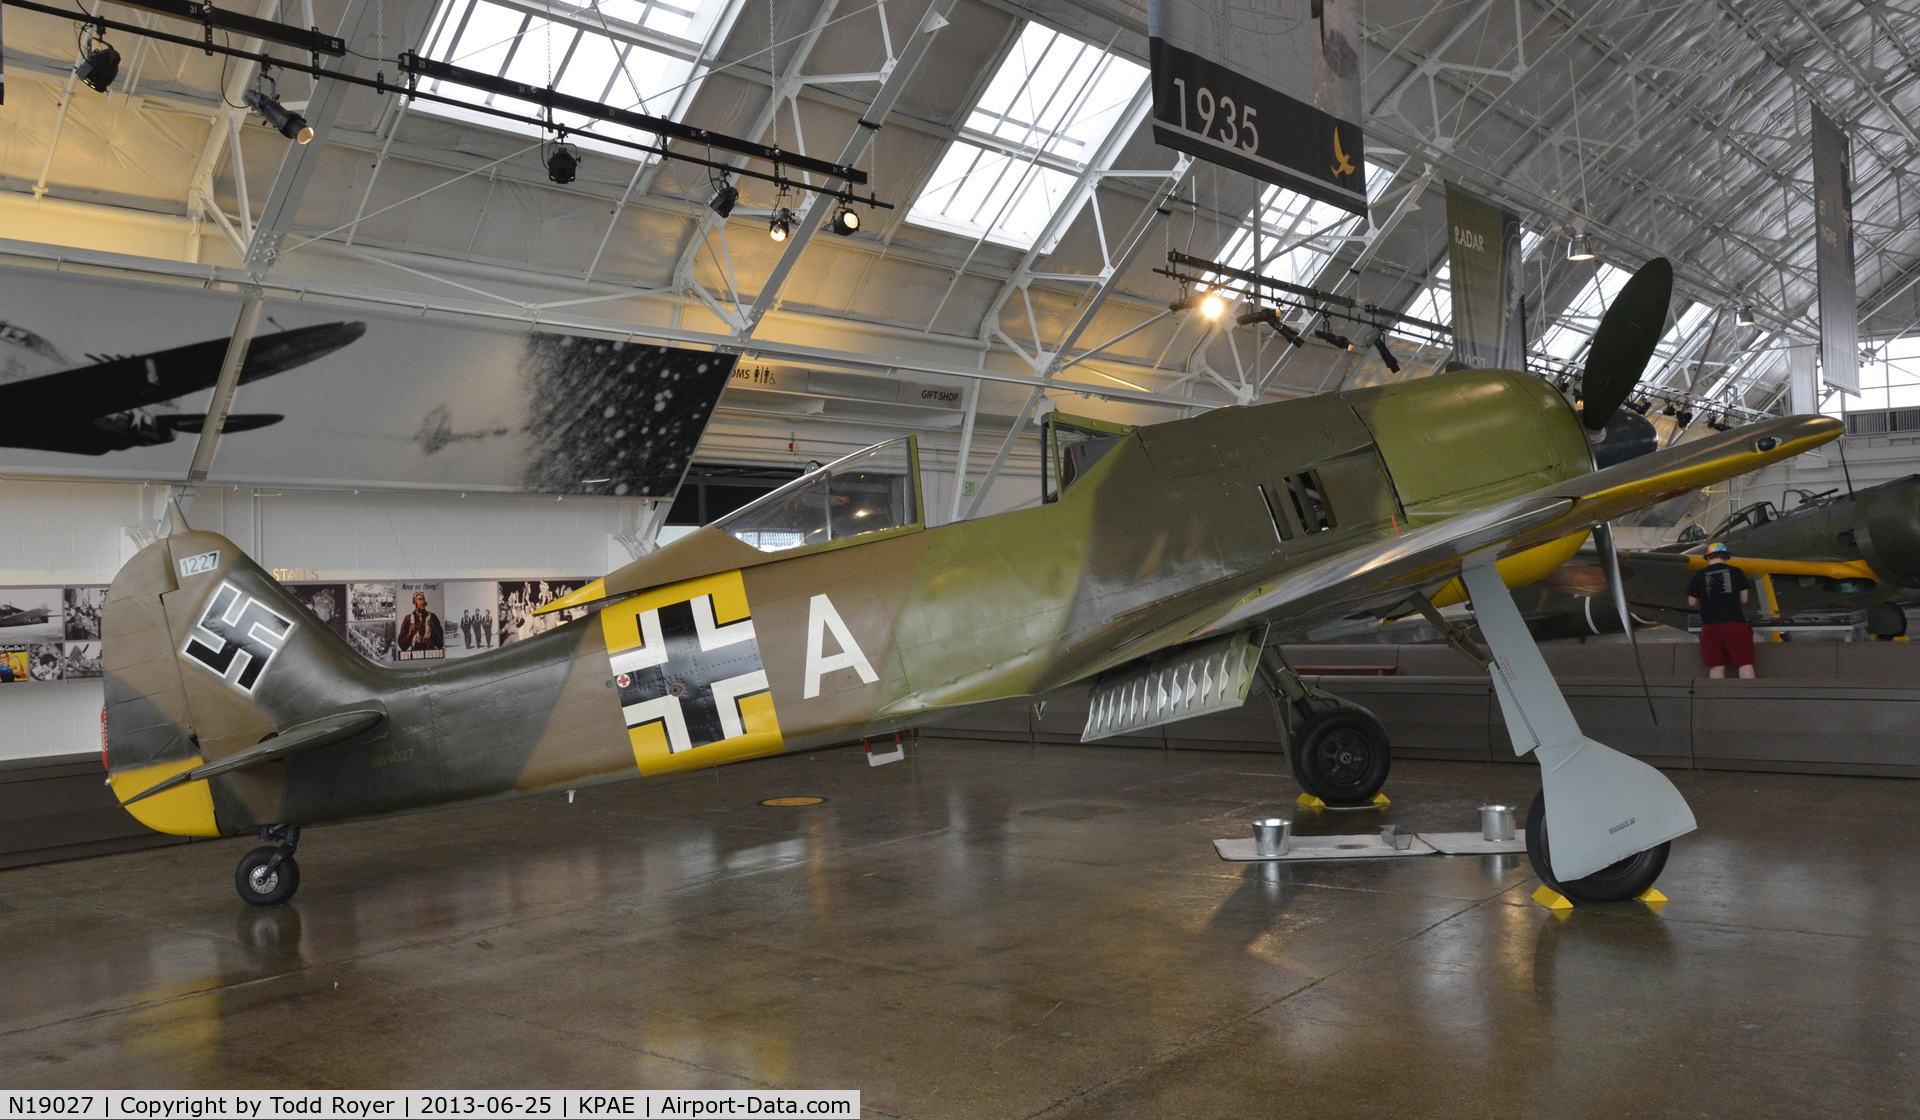 N19027, Focke-Wulf Fw-190A-5/U3 C/N 0151227, Part of the Flying Heritage Collection